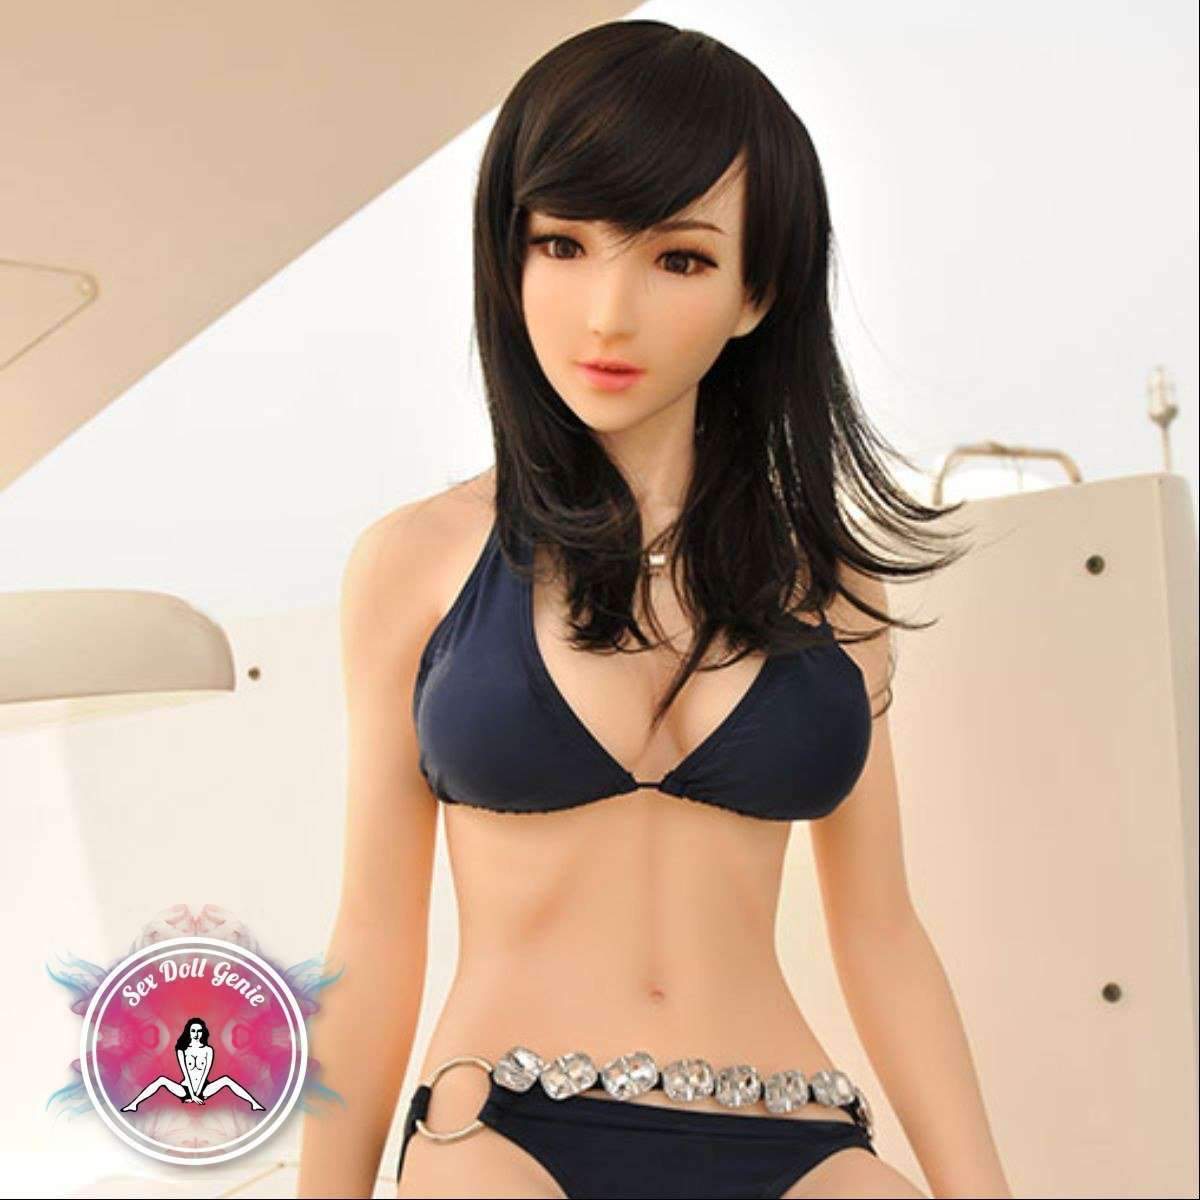 DS Doll - 163Plus - Jiaxin Head - Type 4 D Cup Silicone Doll-1